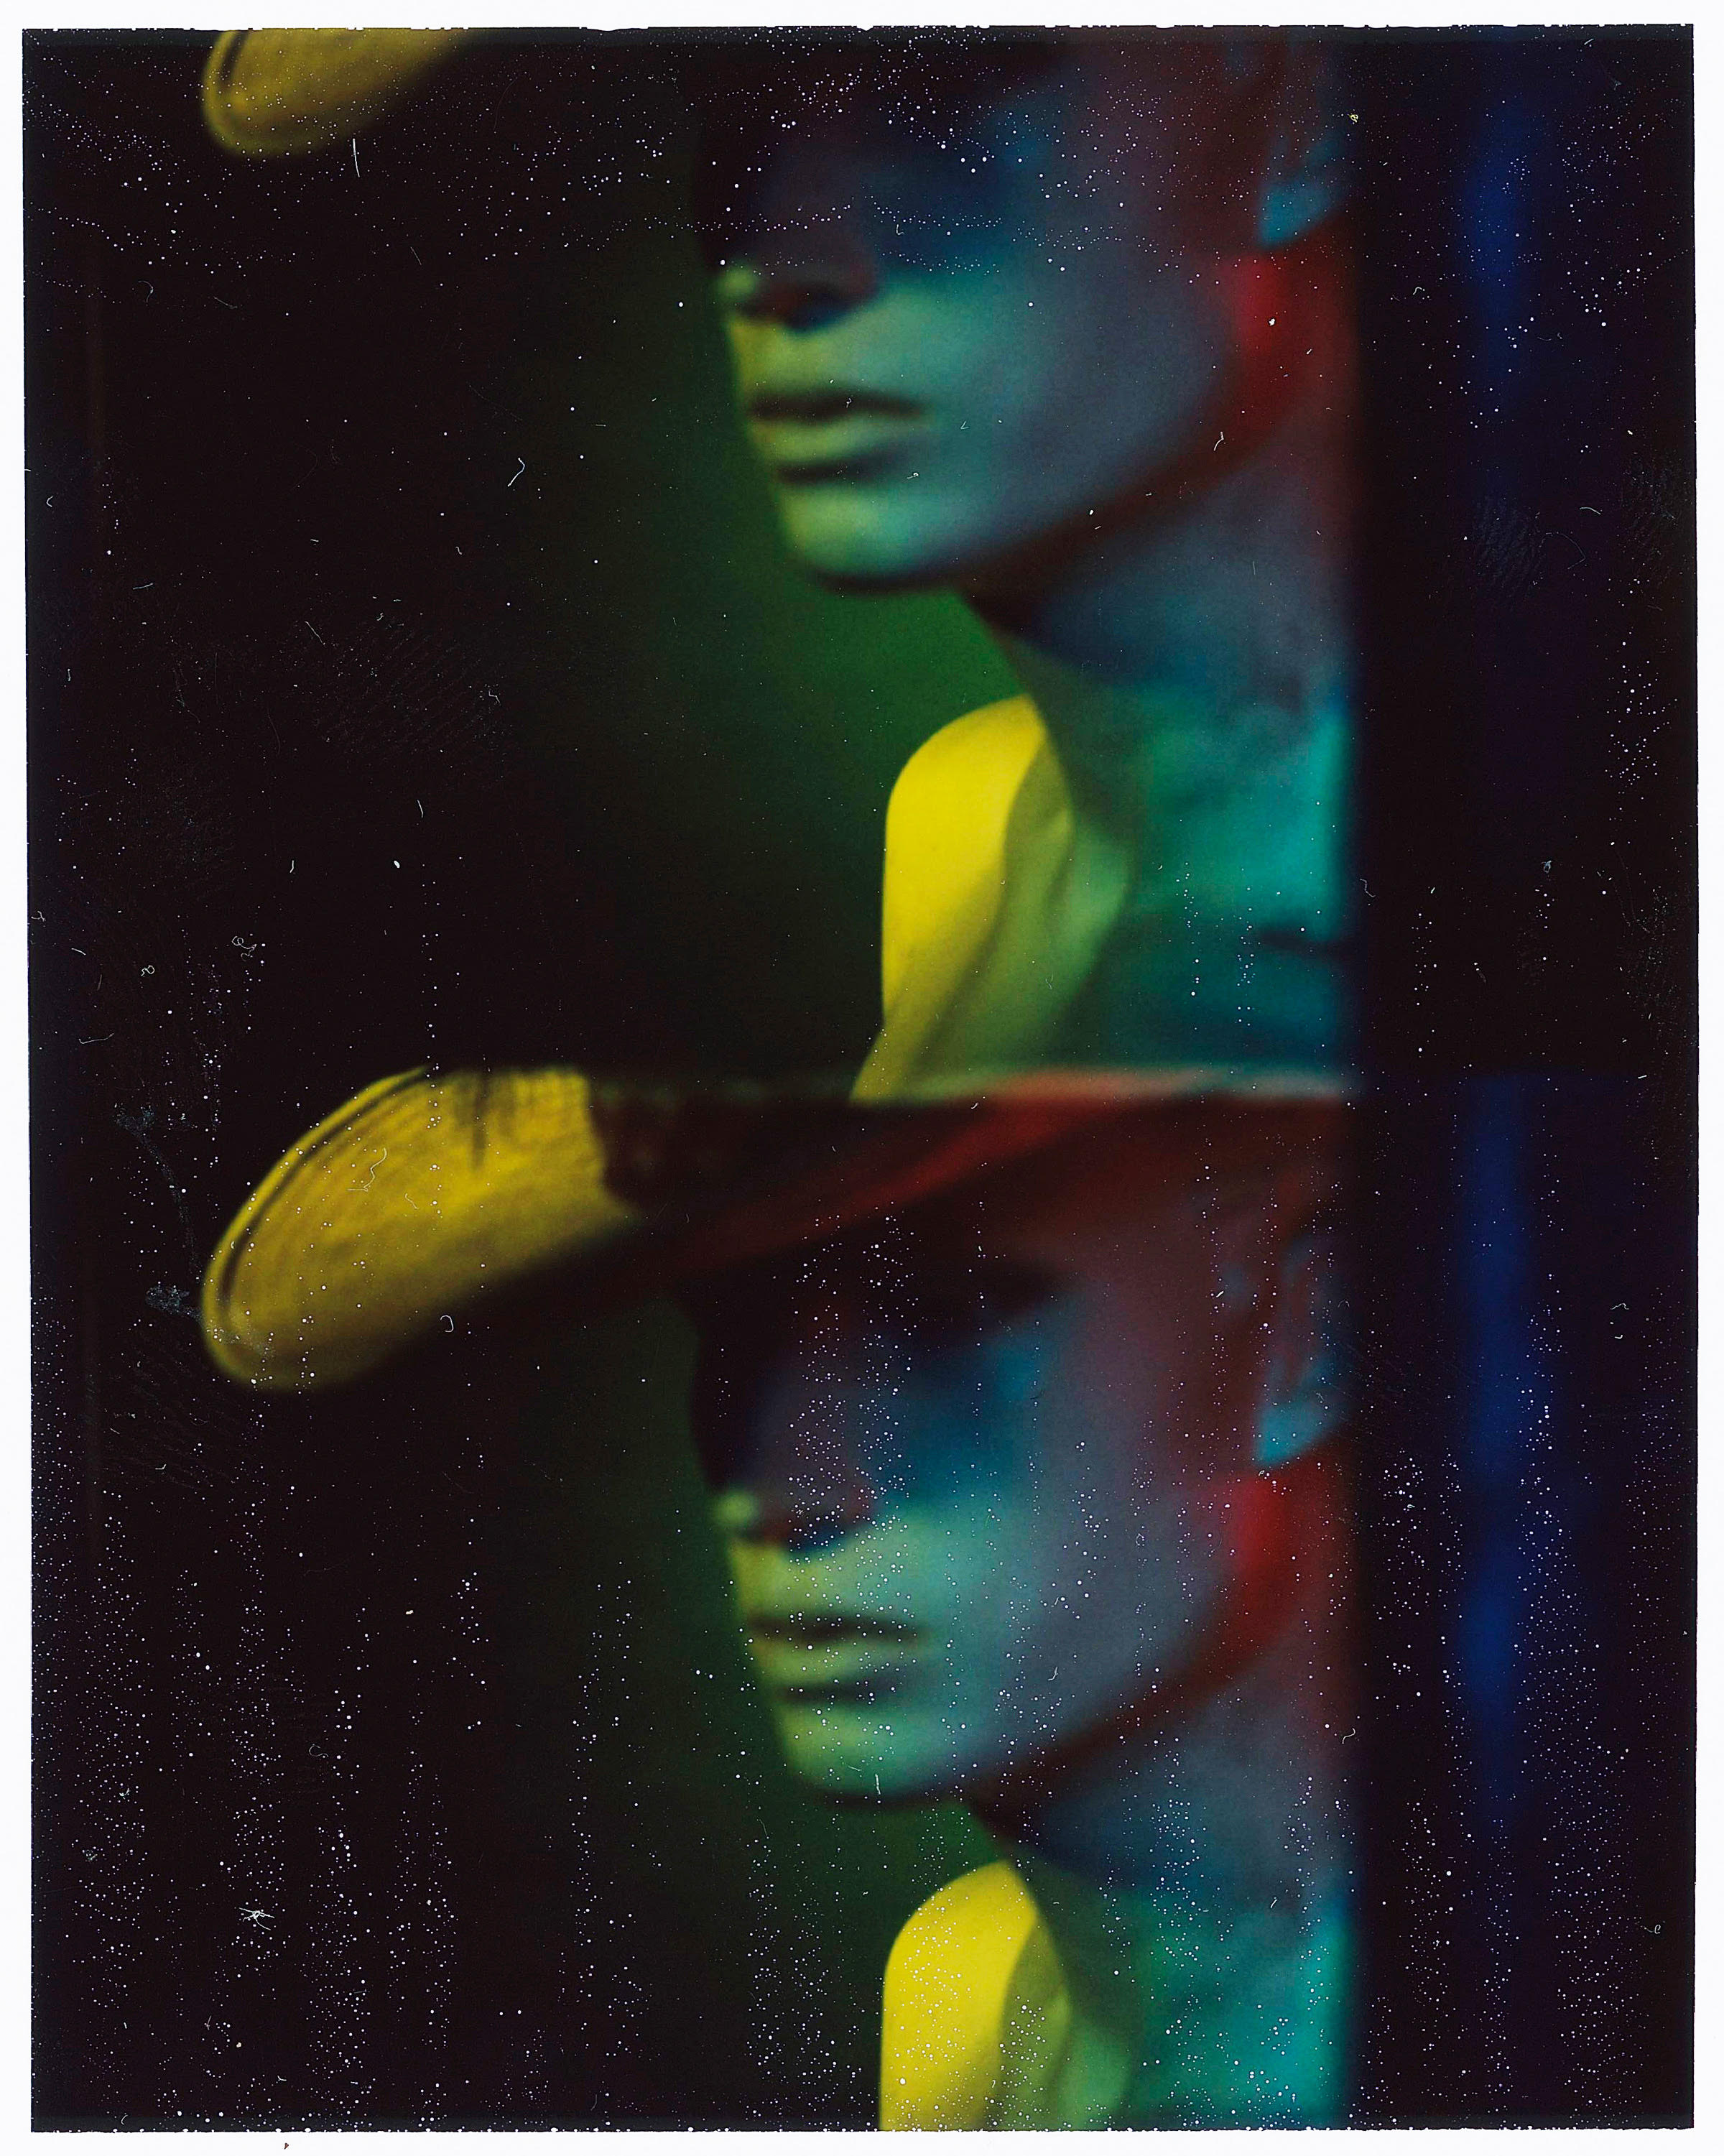   Jer Nelsen  •&nbsp;Marion, IN   This is a Polaroid of a white window model with a Western hat/feather combo. The Image is shot with a passport camera in the studio. When I think of “Western” I think of both consumerist vice and adventure, as well a